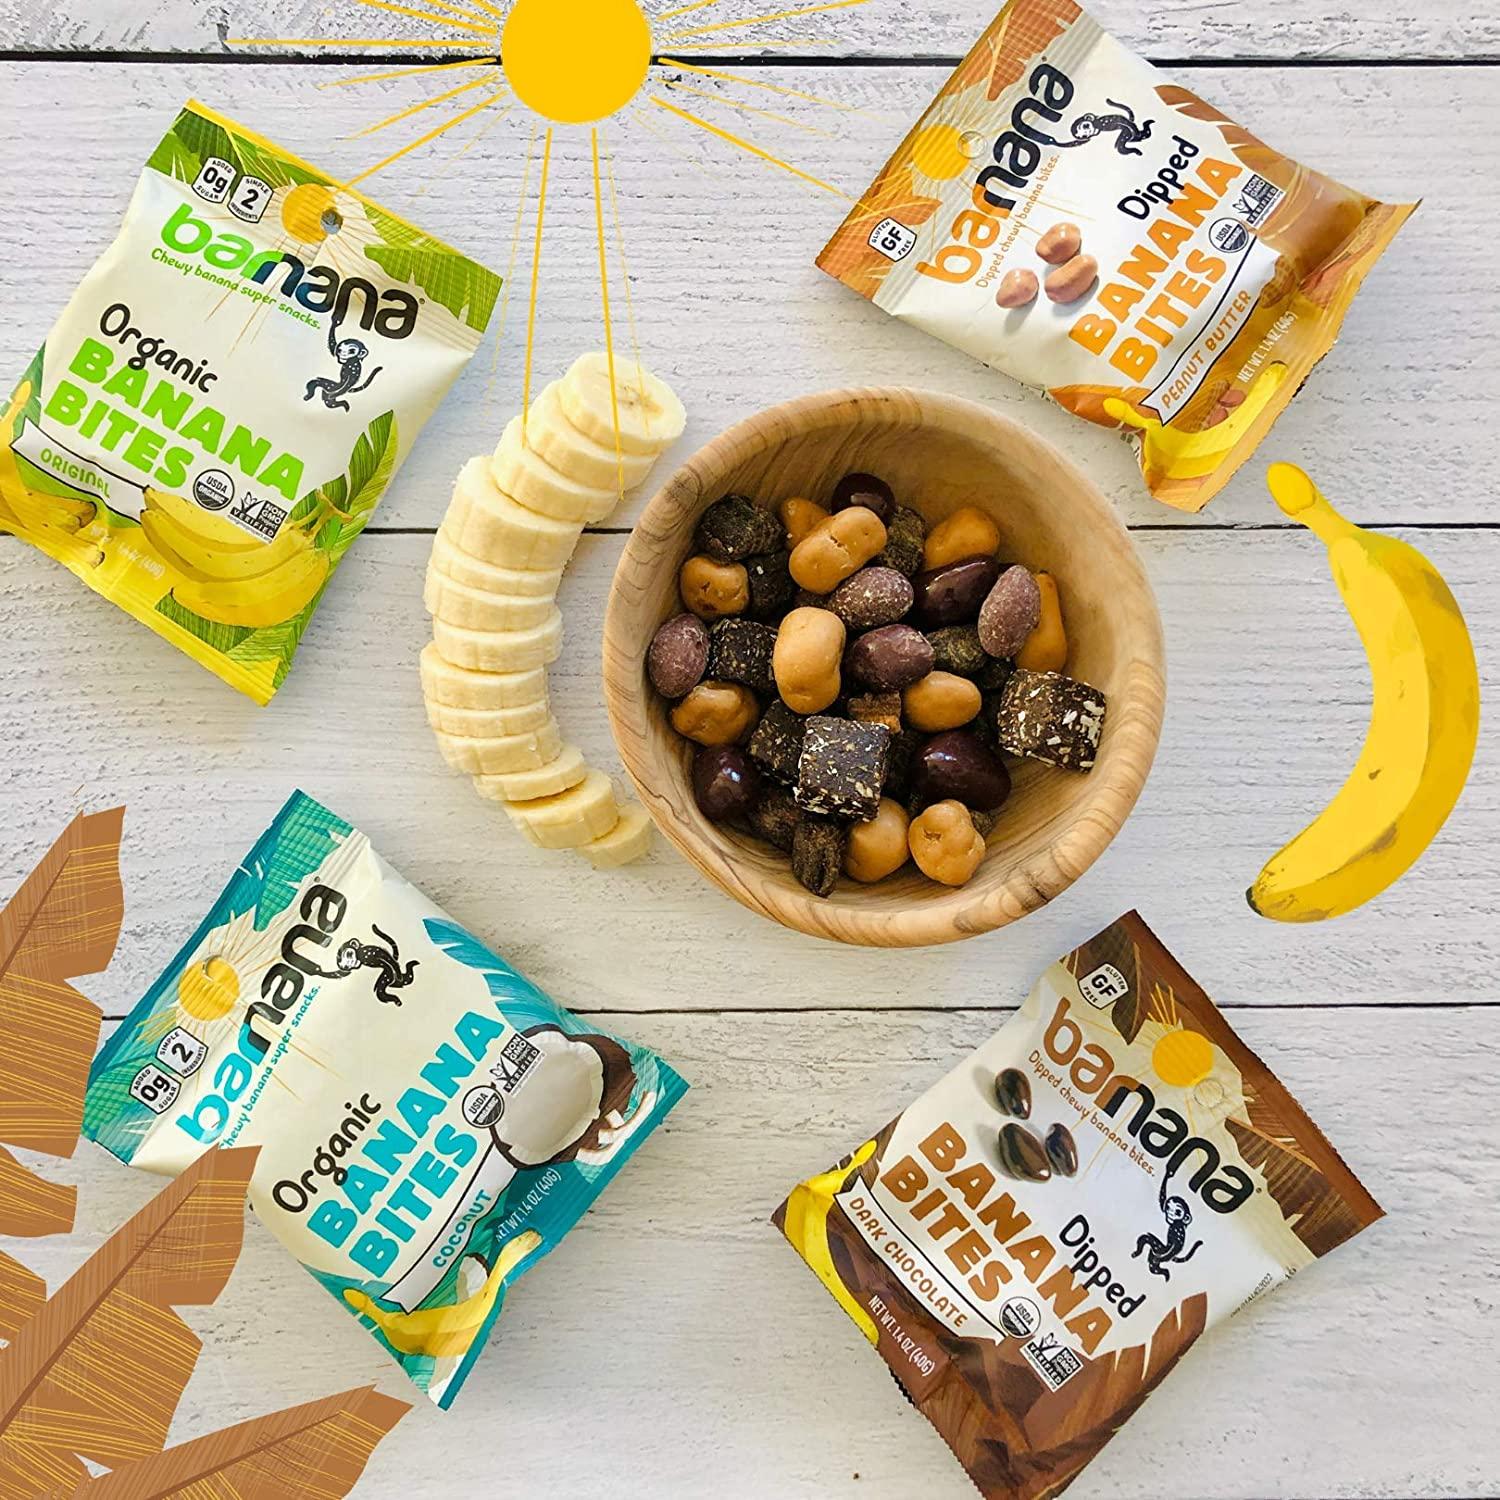 Organic Peanut Butter Chewy Banana Bites Snack Size